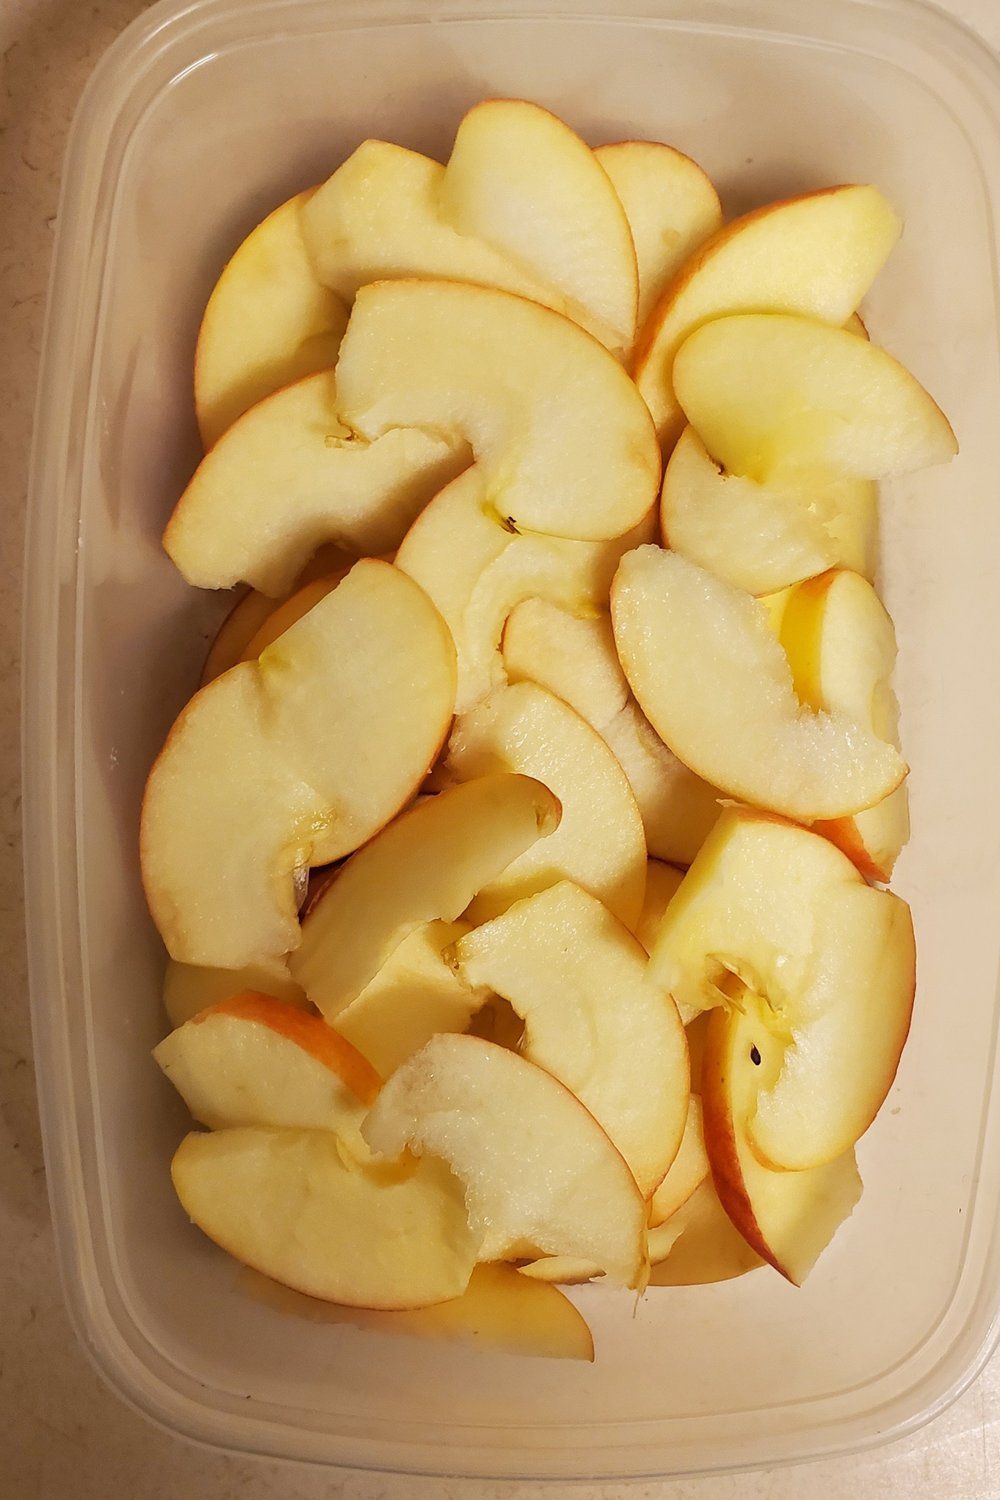  To keep the apples fresh, soak them in a solution of lemon juice and salt for 15 minutes, then pat them dry. I used  these instructions  as a reference. 